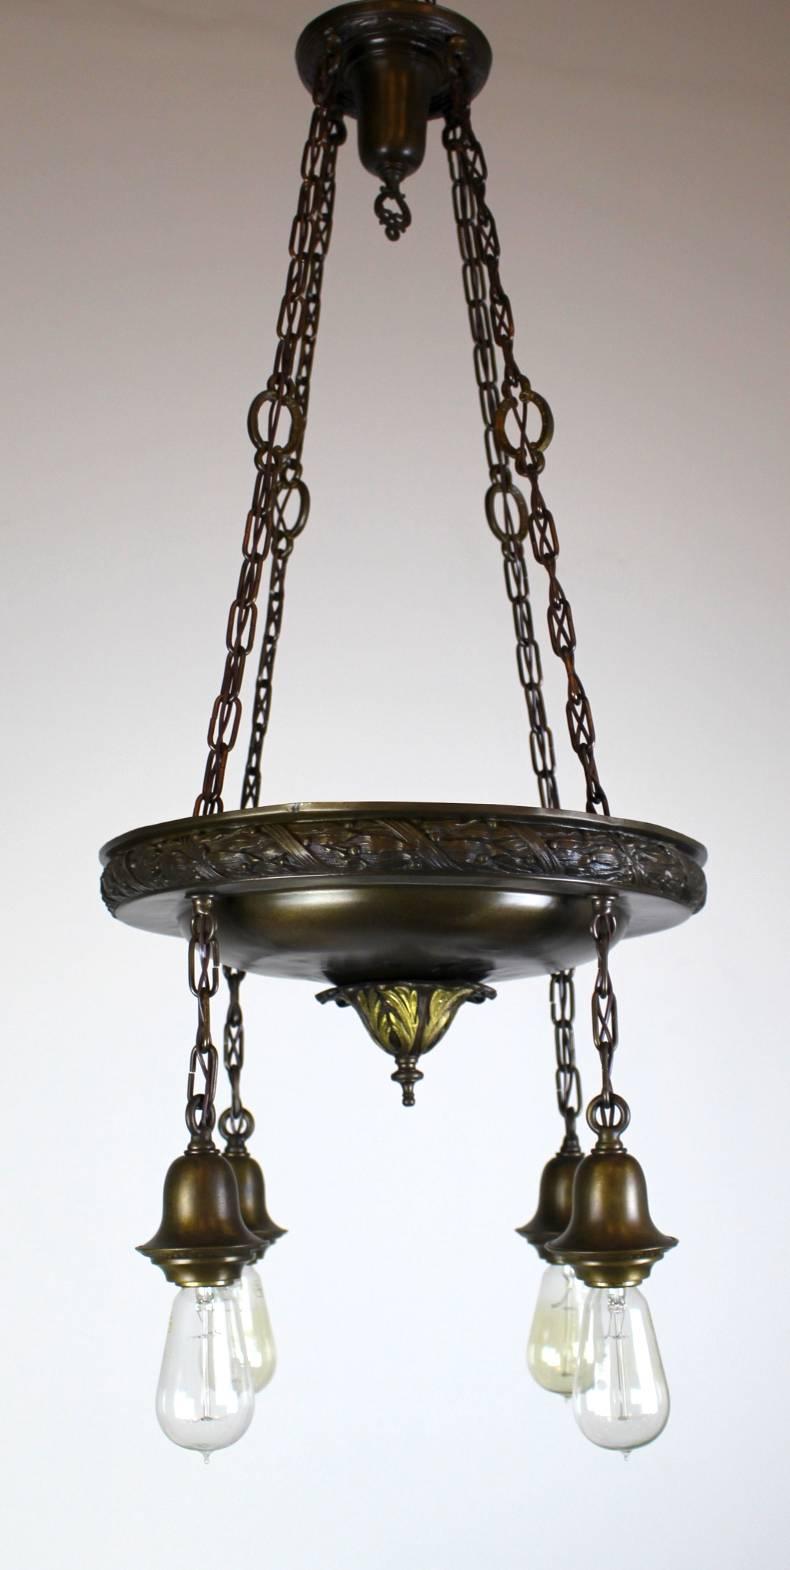 Lovely shower fixture with bare Edison bulbs.

Large body fixture with Laurel wreath design on edging and gold leaves in centre.

Four lights. Finished in a dark chocolate brass.

Measures: 41